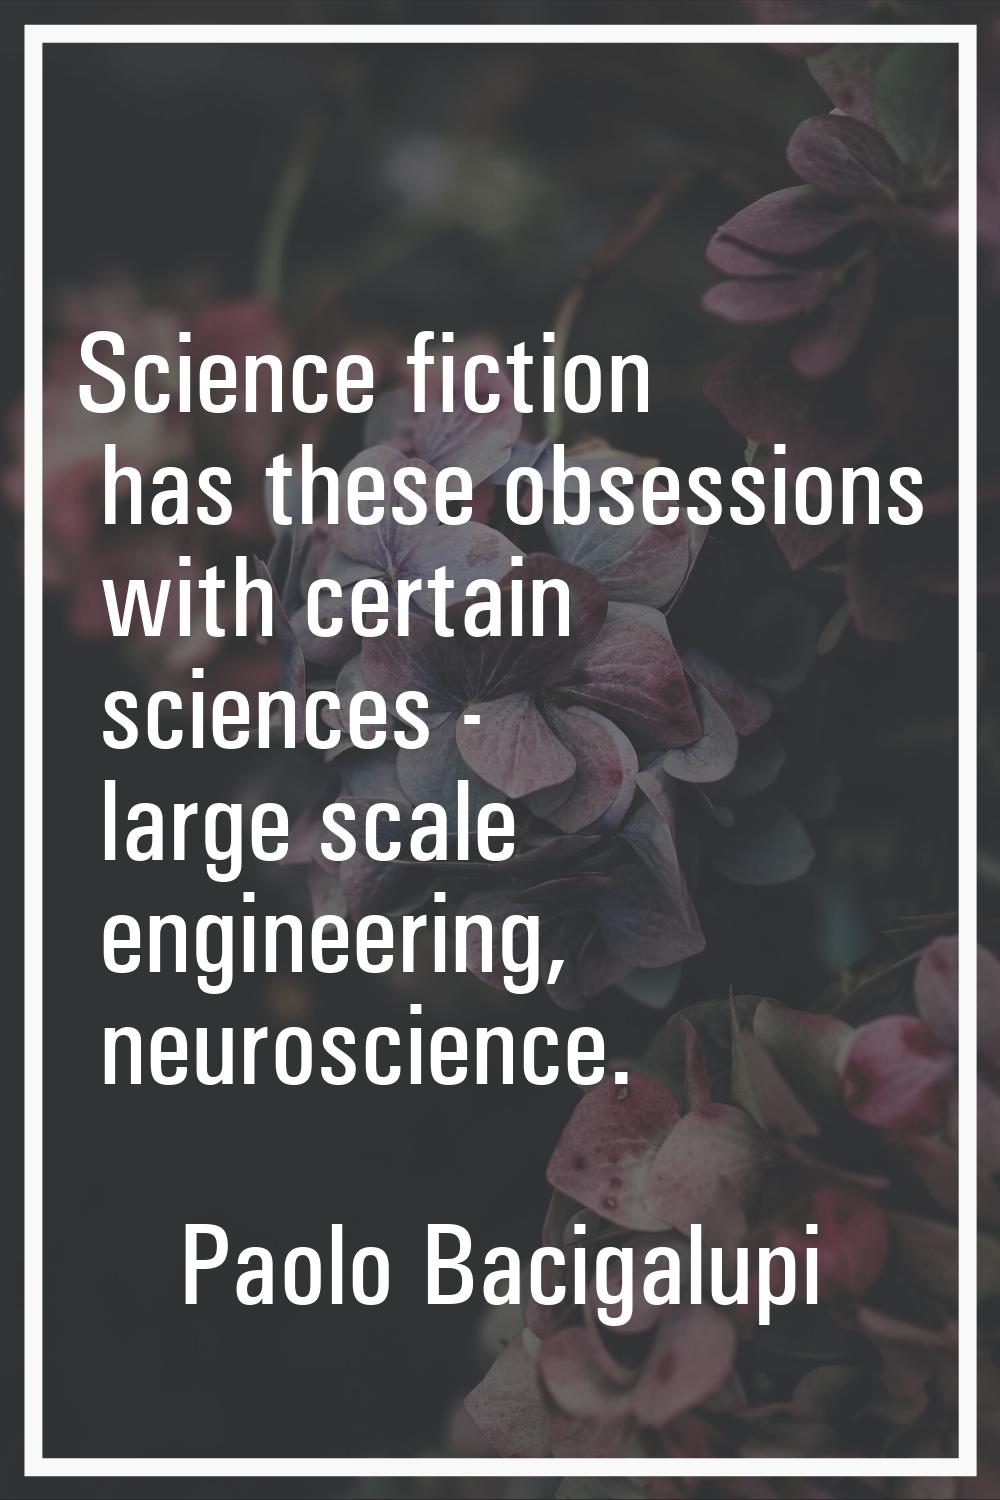 Science fiction has these obsessions with certain sciences - large scale engineering, neuroscience.